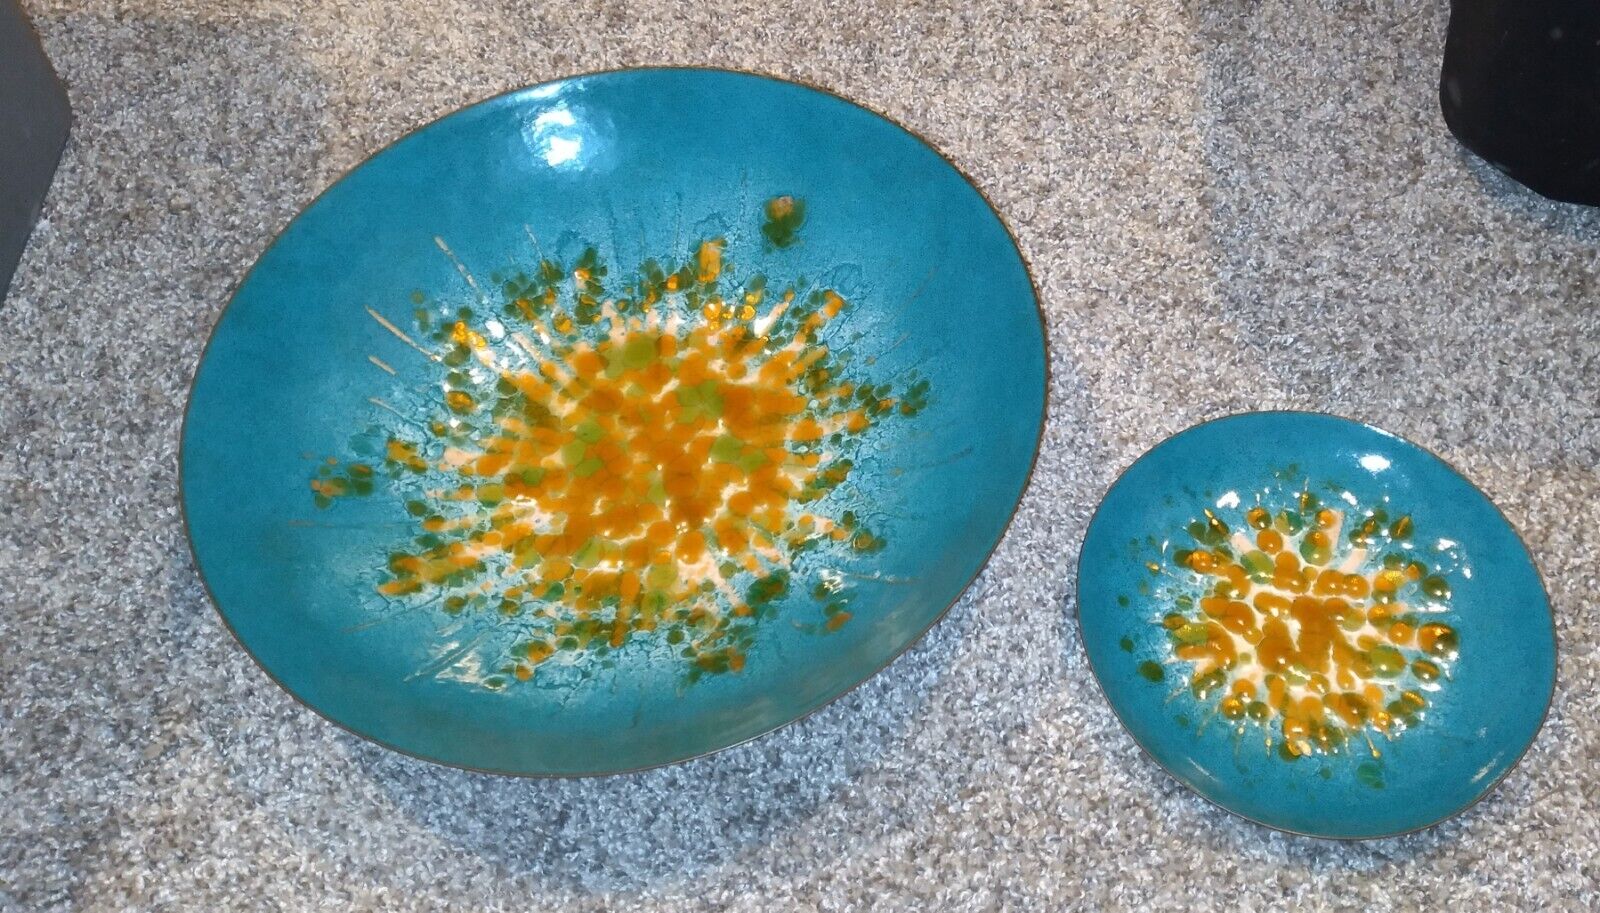 Vintage Convivial Ware Enamel On Copper Bowl and Plate by Mesick Studios...